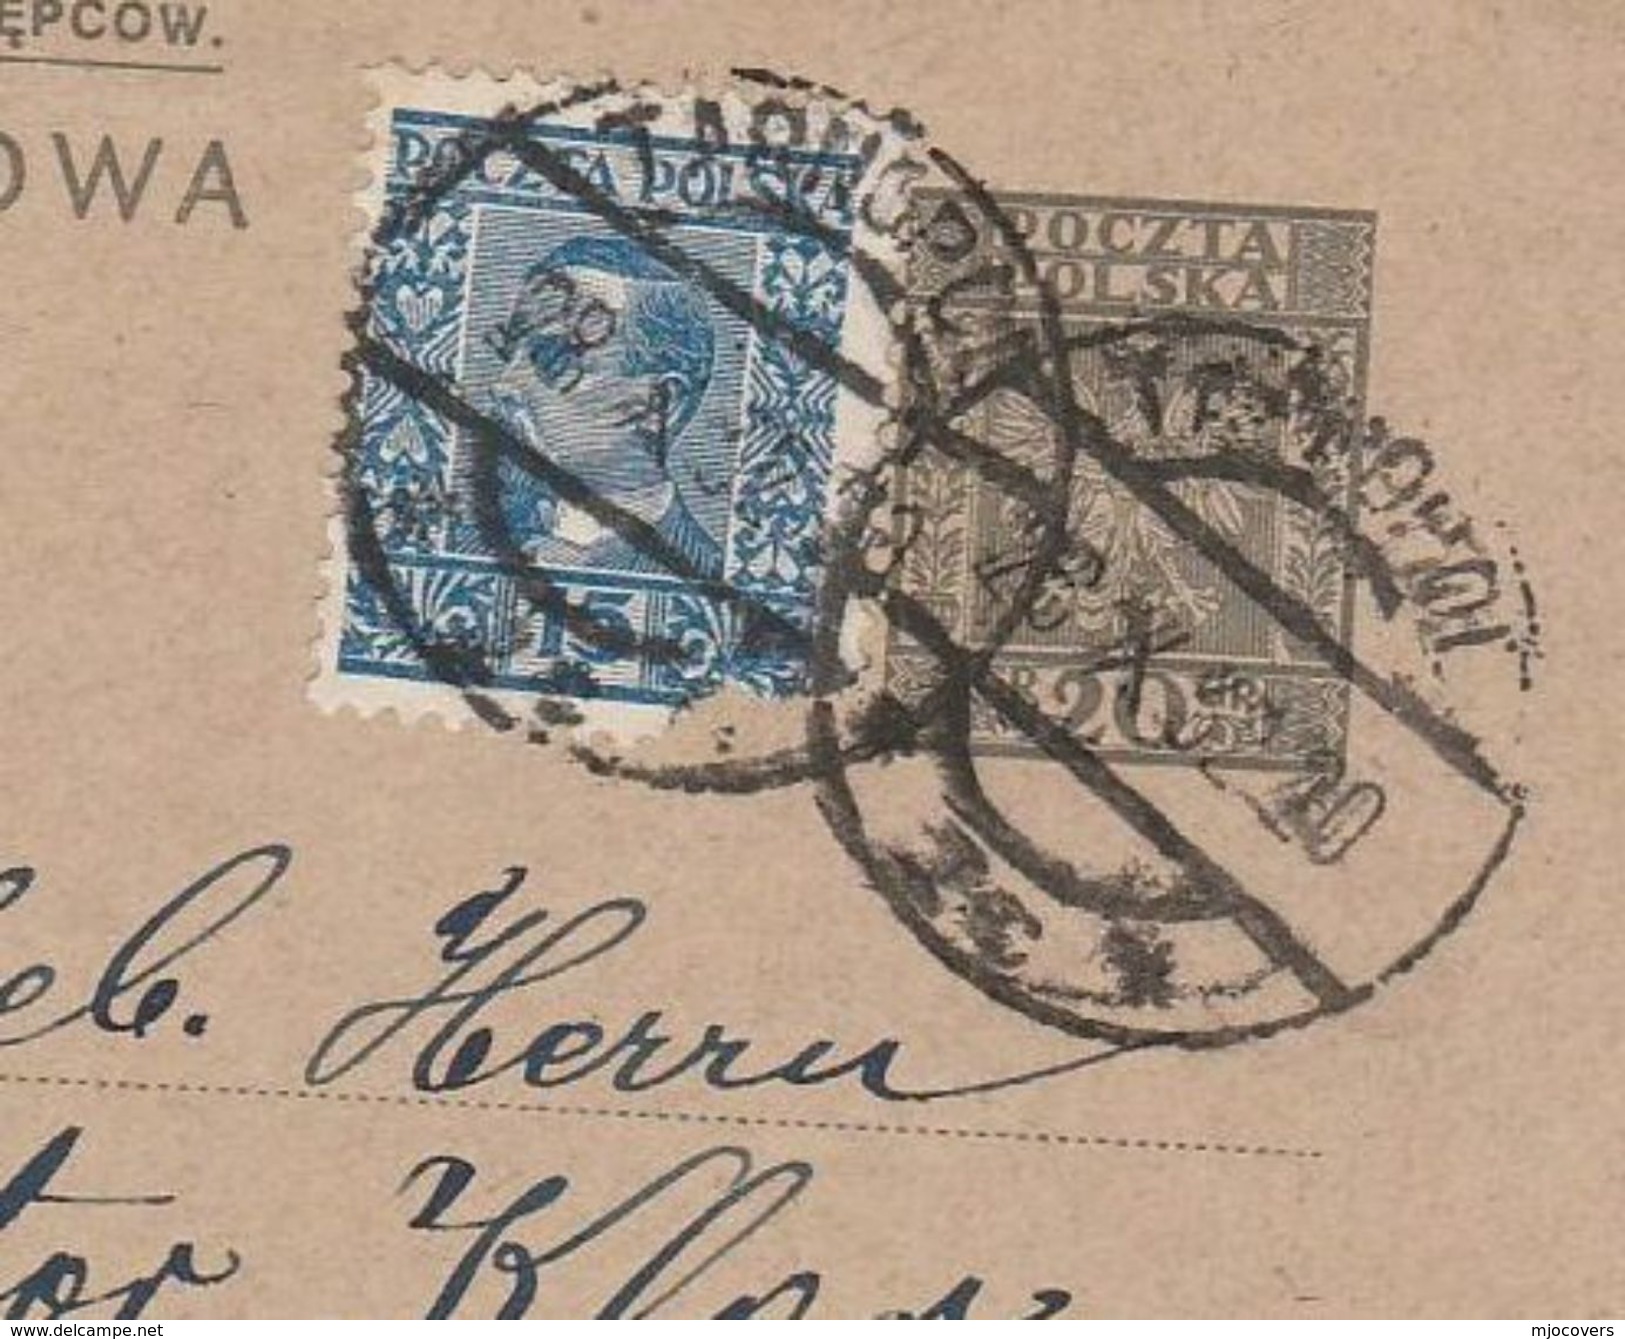 1932 TARNOPOL Poland  POSTAL STATIONERY CARD To Leipzig Cover Stamps Ukraine - Covers & Documents